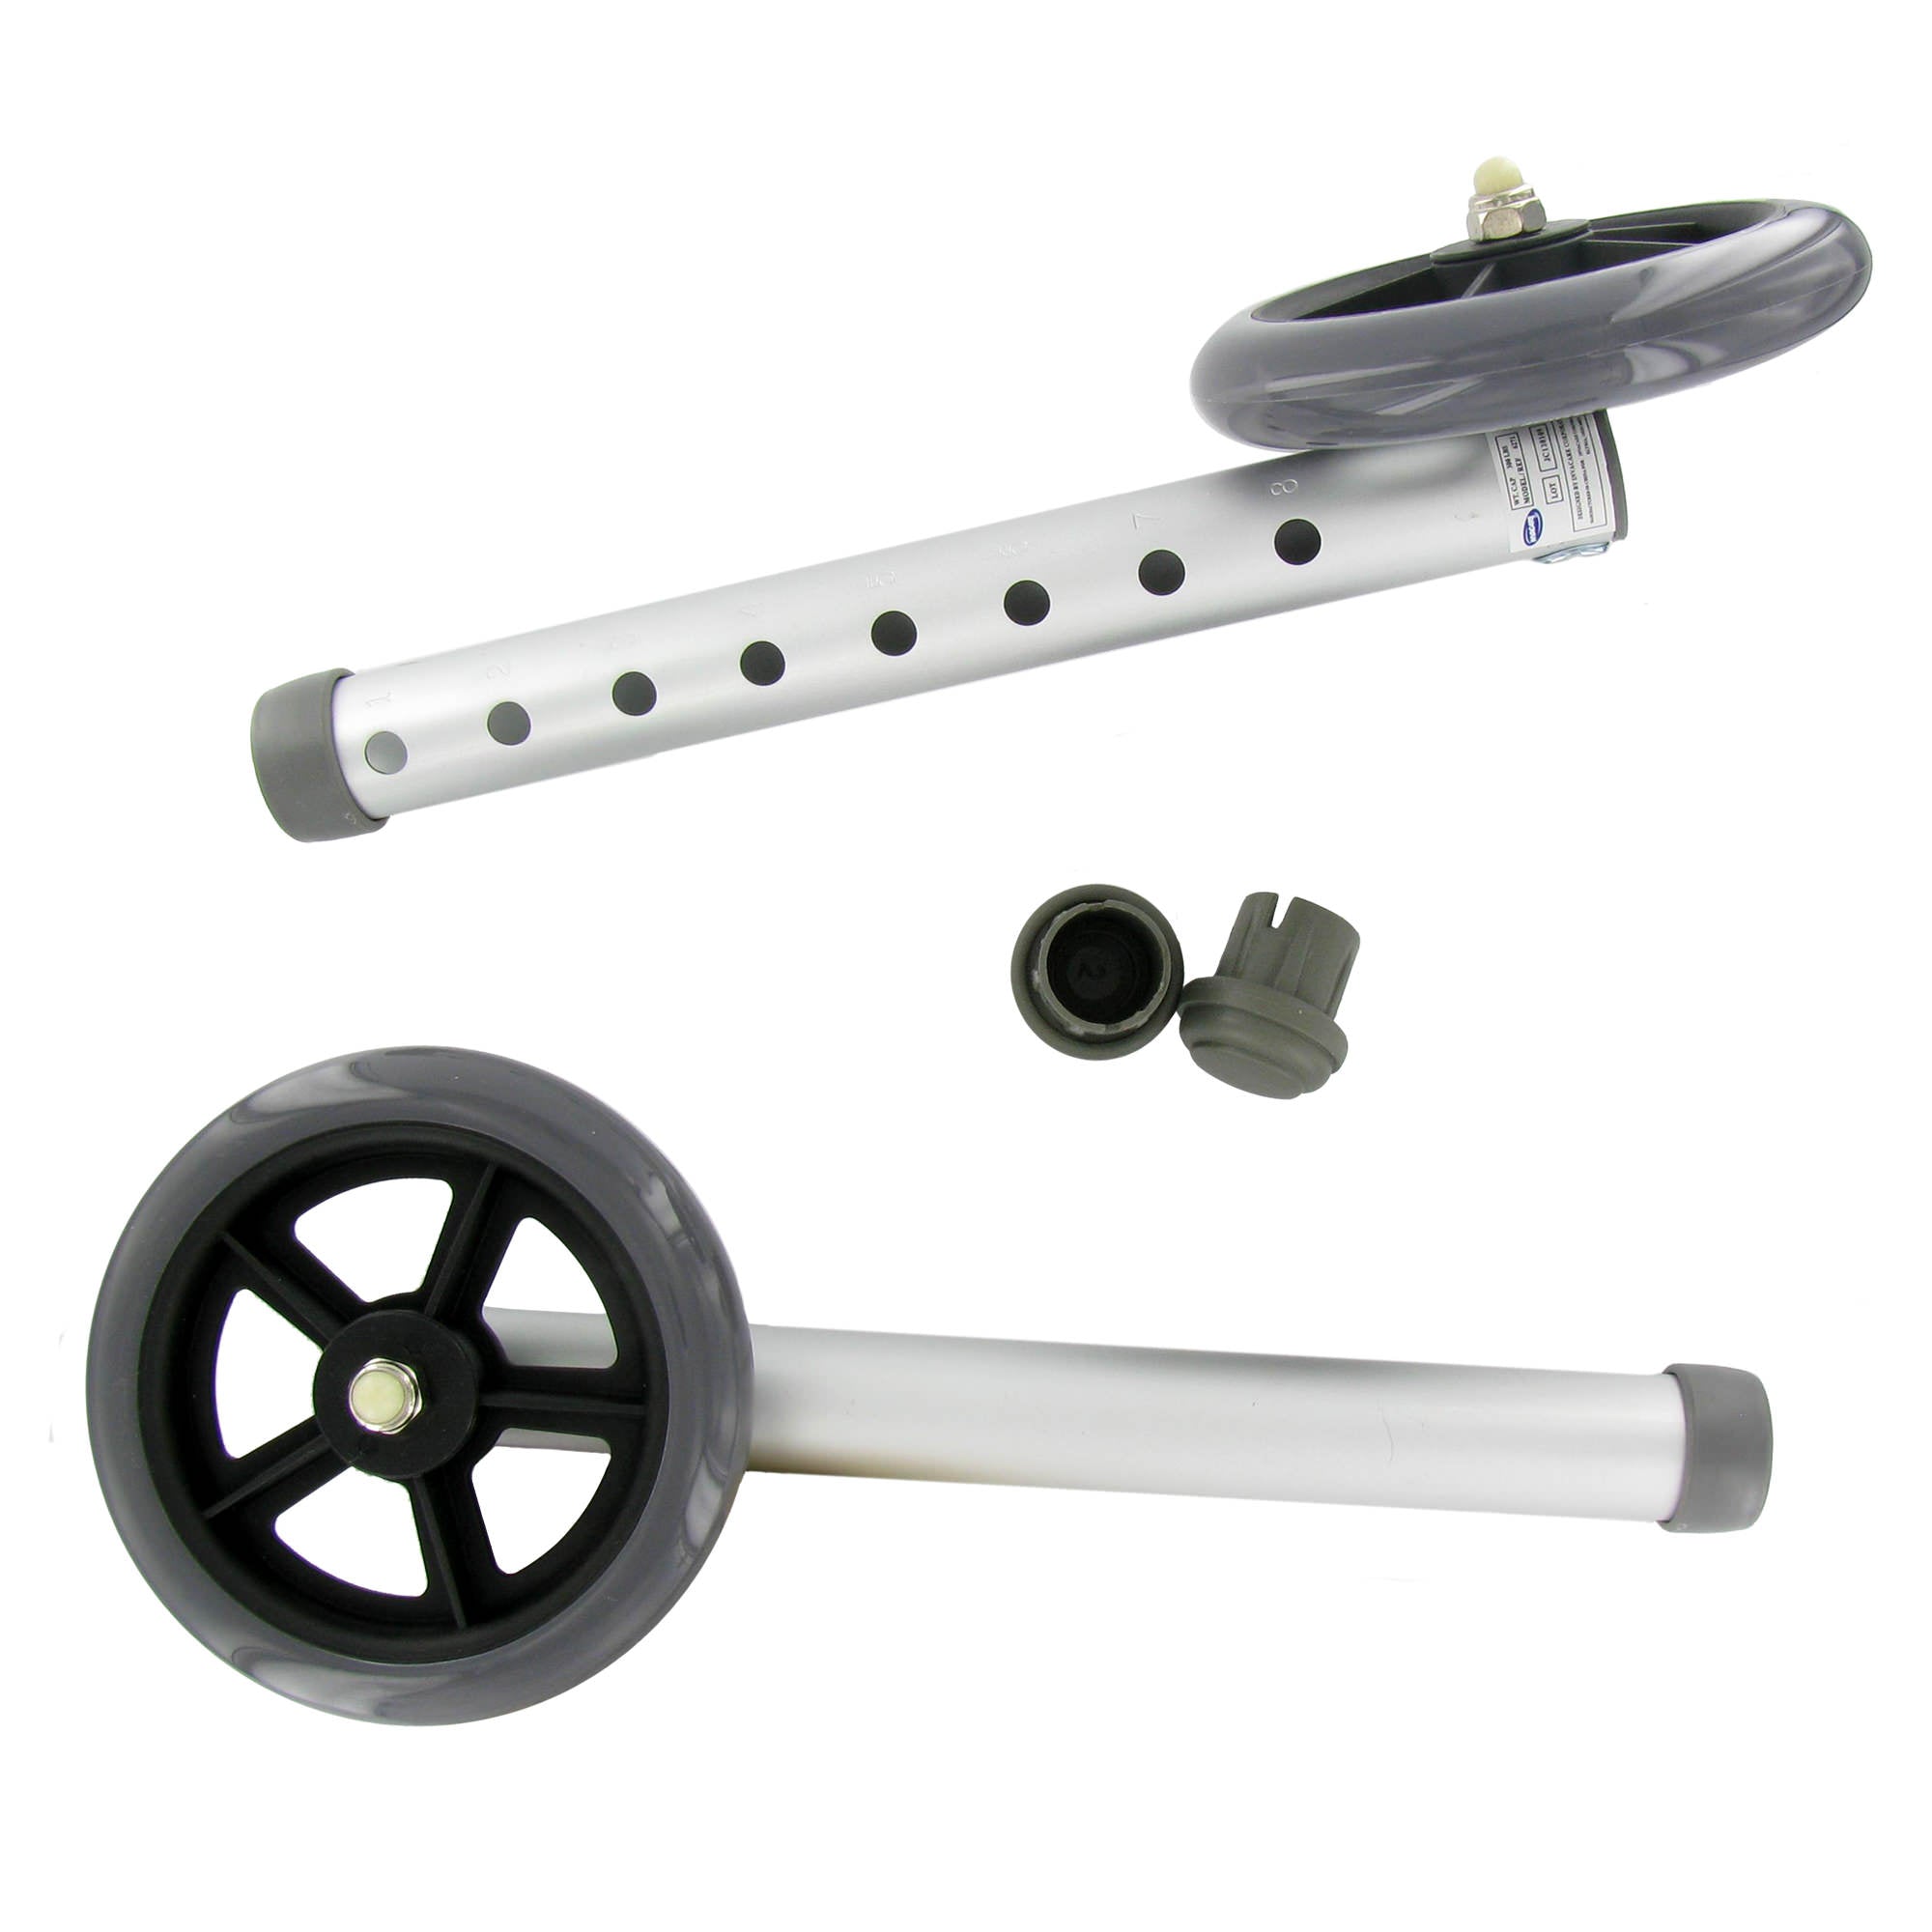 5" Single Fixed Wheel Attachments with Glide Tips